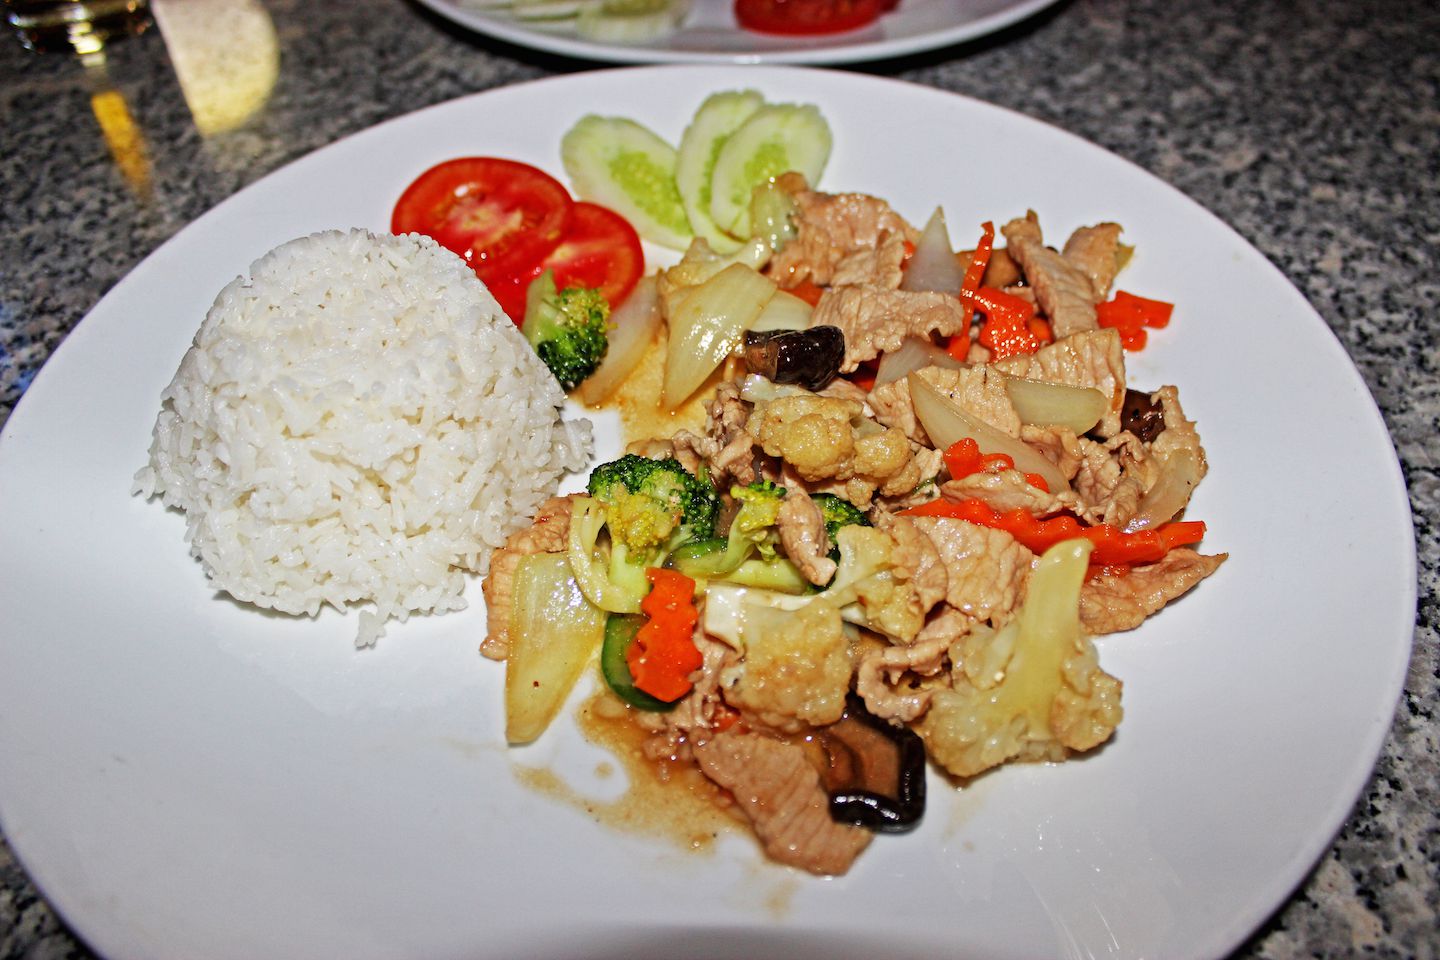 Stir fried chicken with vegetables at City View Cafe